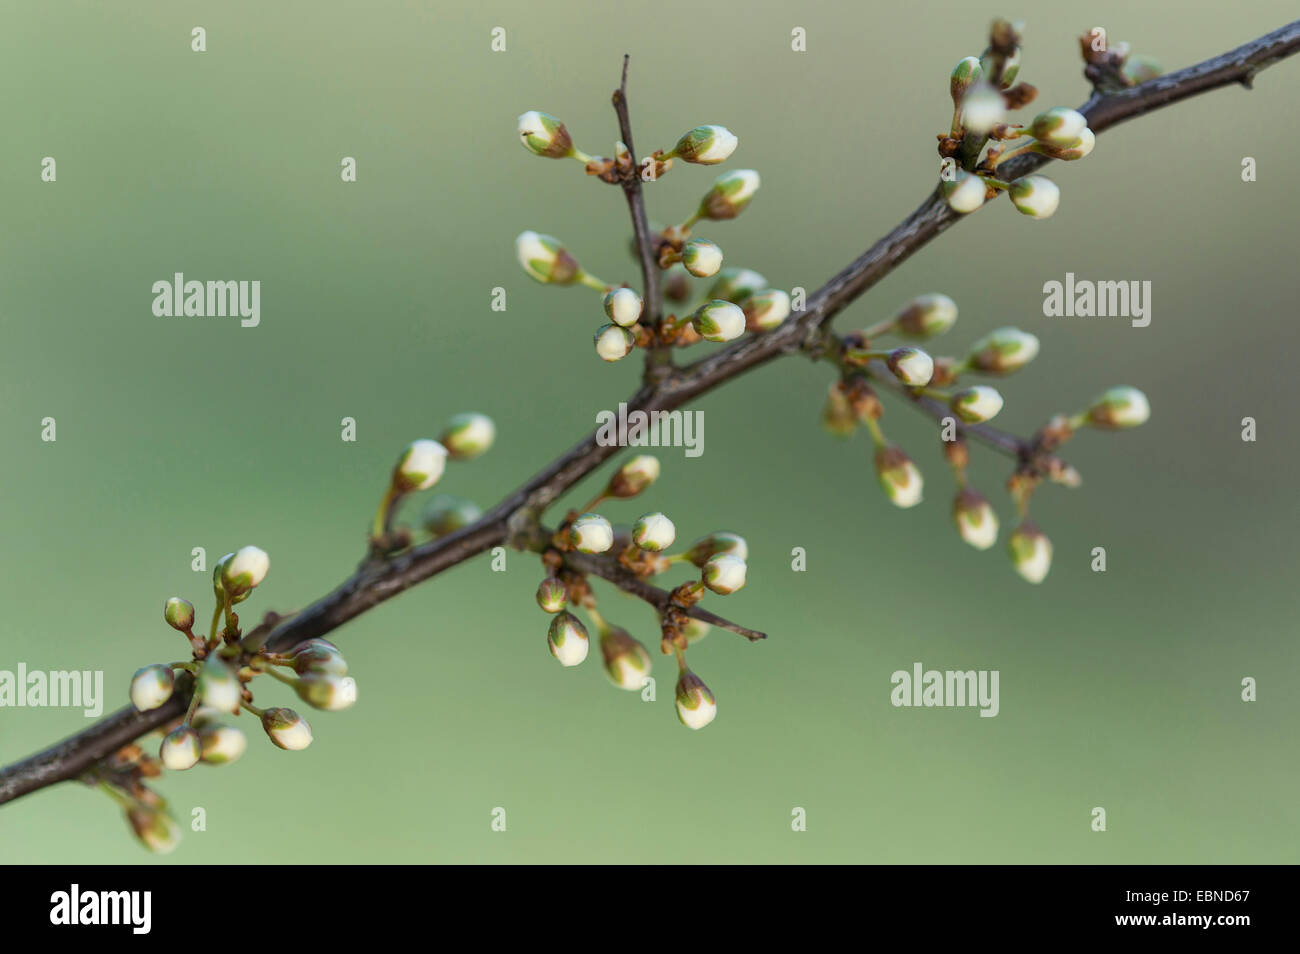 blackthorn, sloe (Prunus spinosa), branch with buds, Germany Stock Photo